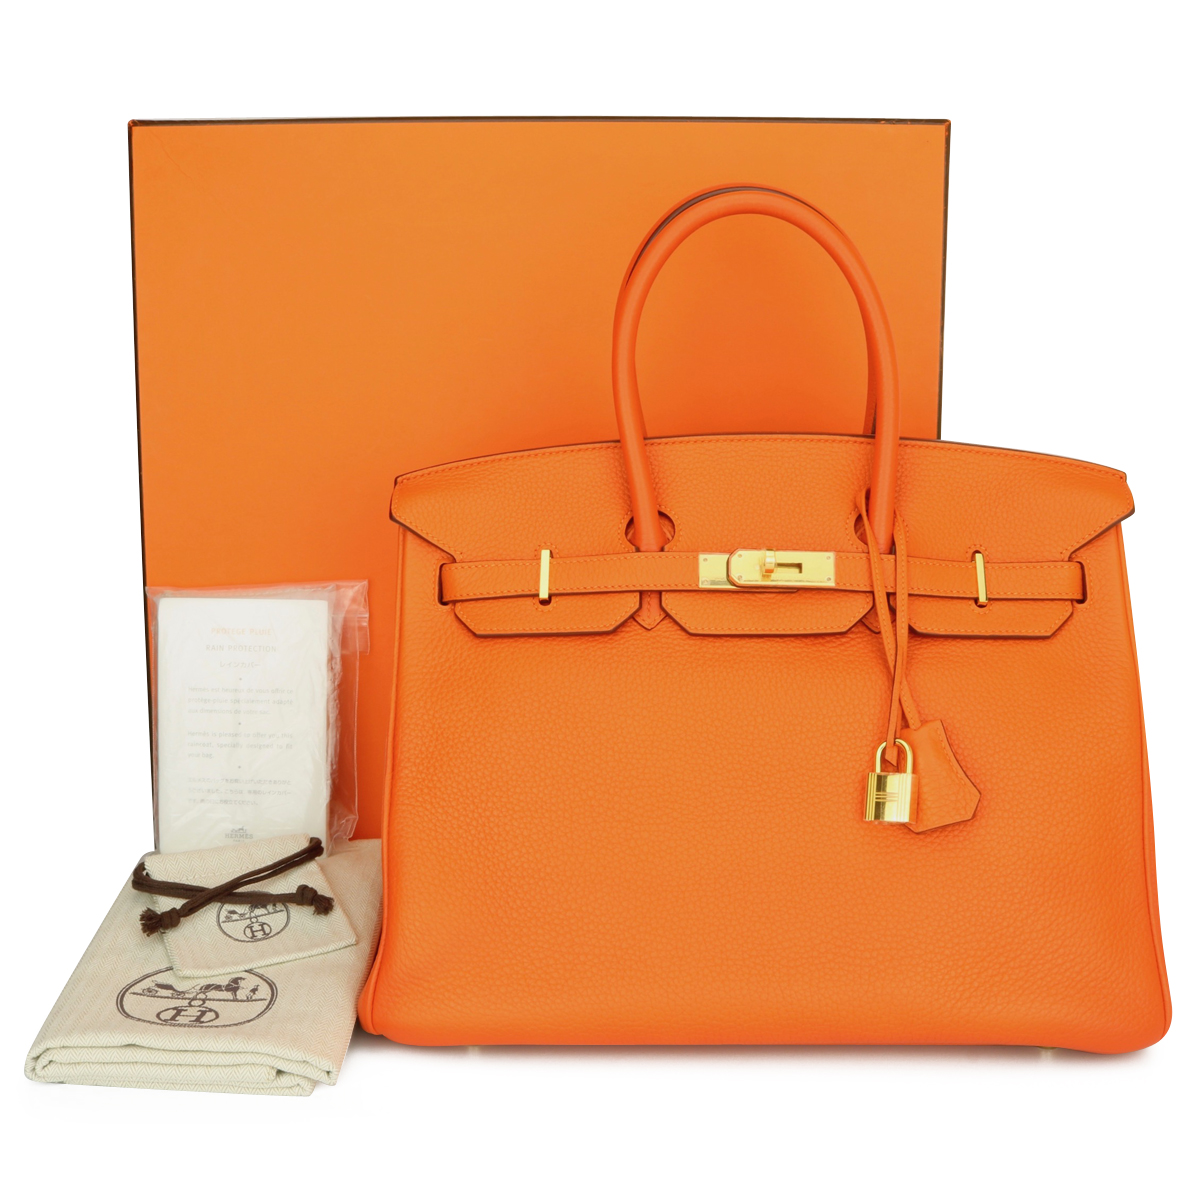 Chocolate Birkin 35cm in Togo Leather with Gold Hardware, 2010